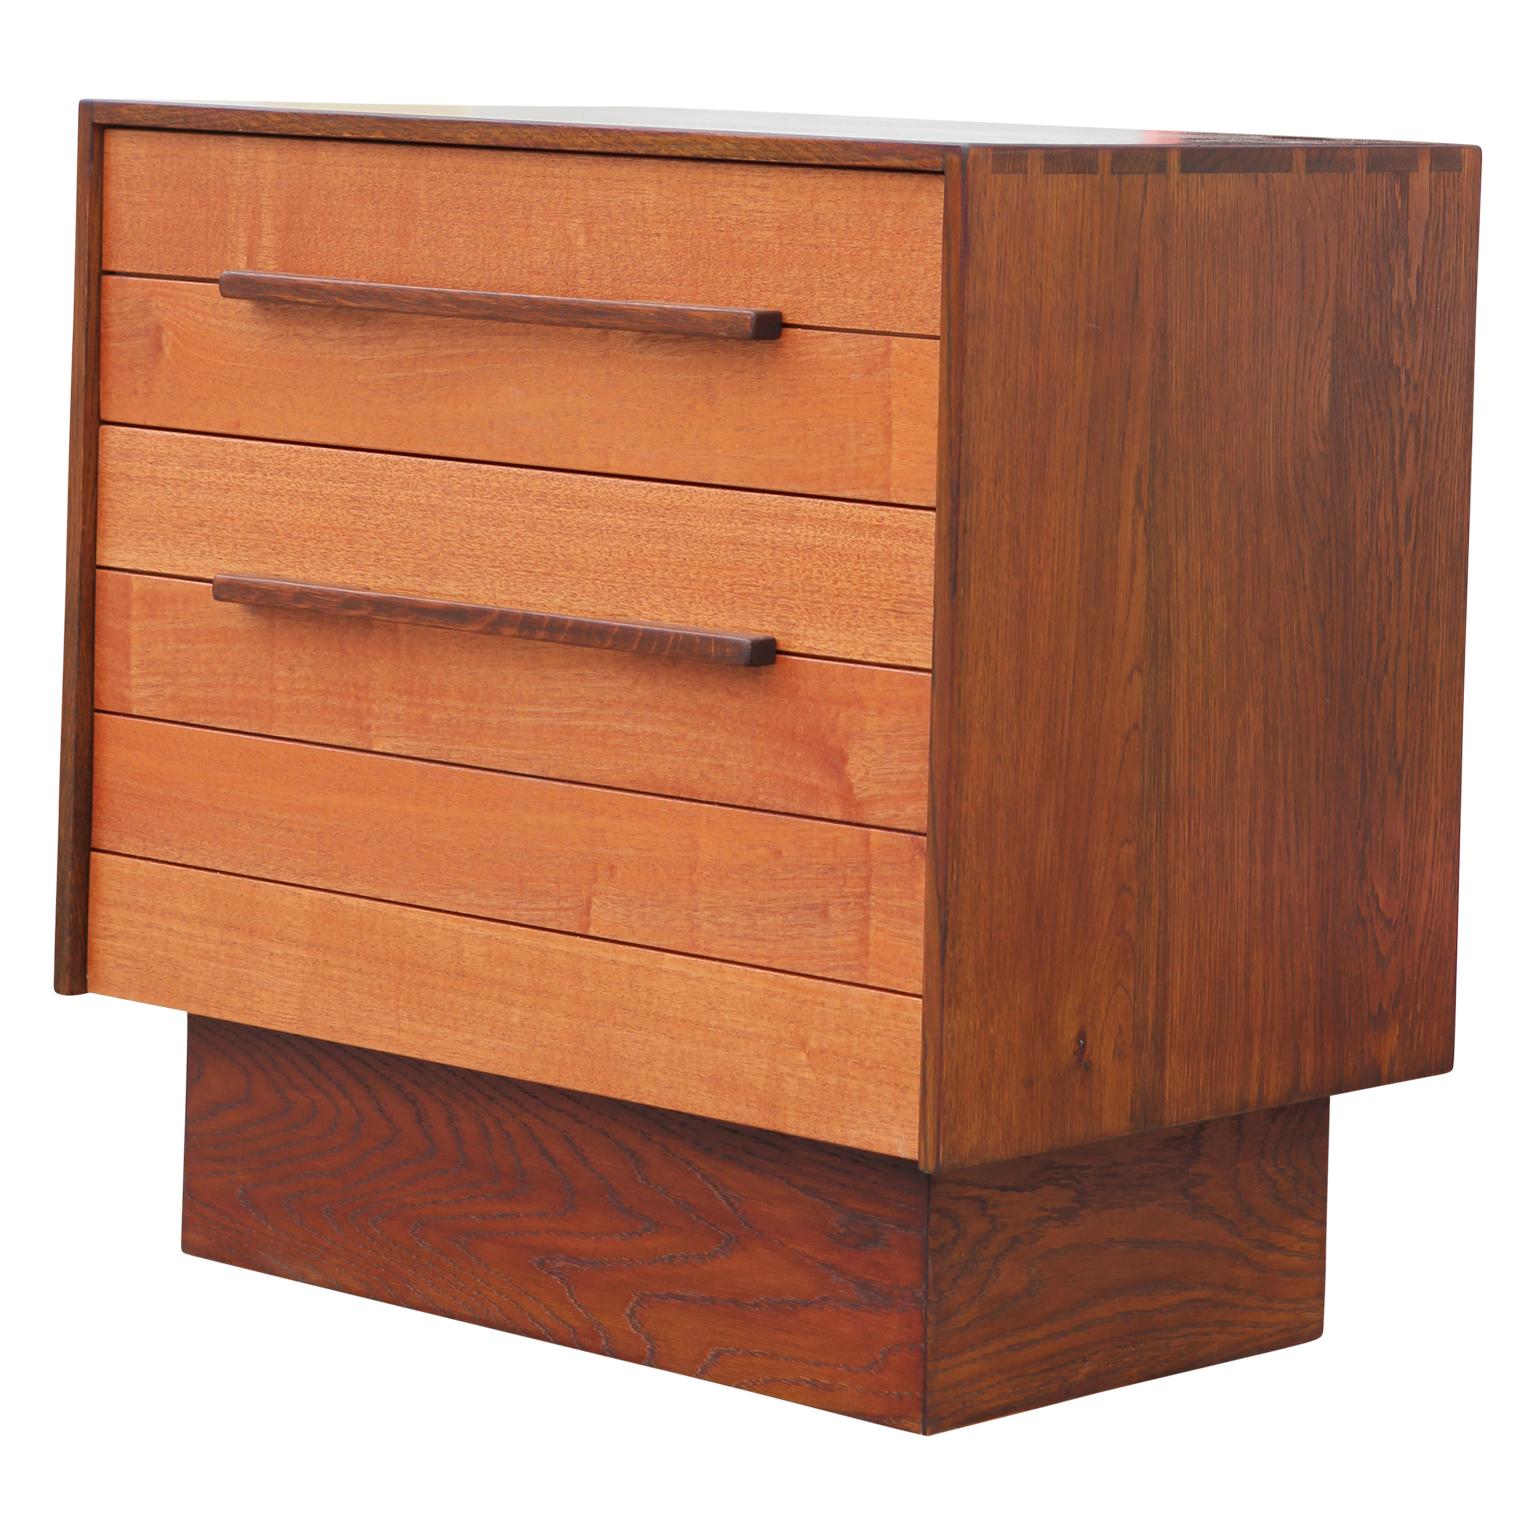 Pair of custom modern norm stoeker two-toned solid wood end table or night stands in a Danish style. The end tables has two pull out / pull-out drawers one large and one smaller. The pieces are handcrafted, studio made with excellency and have a